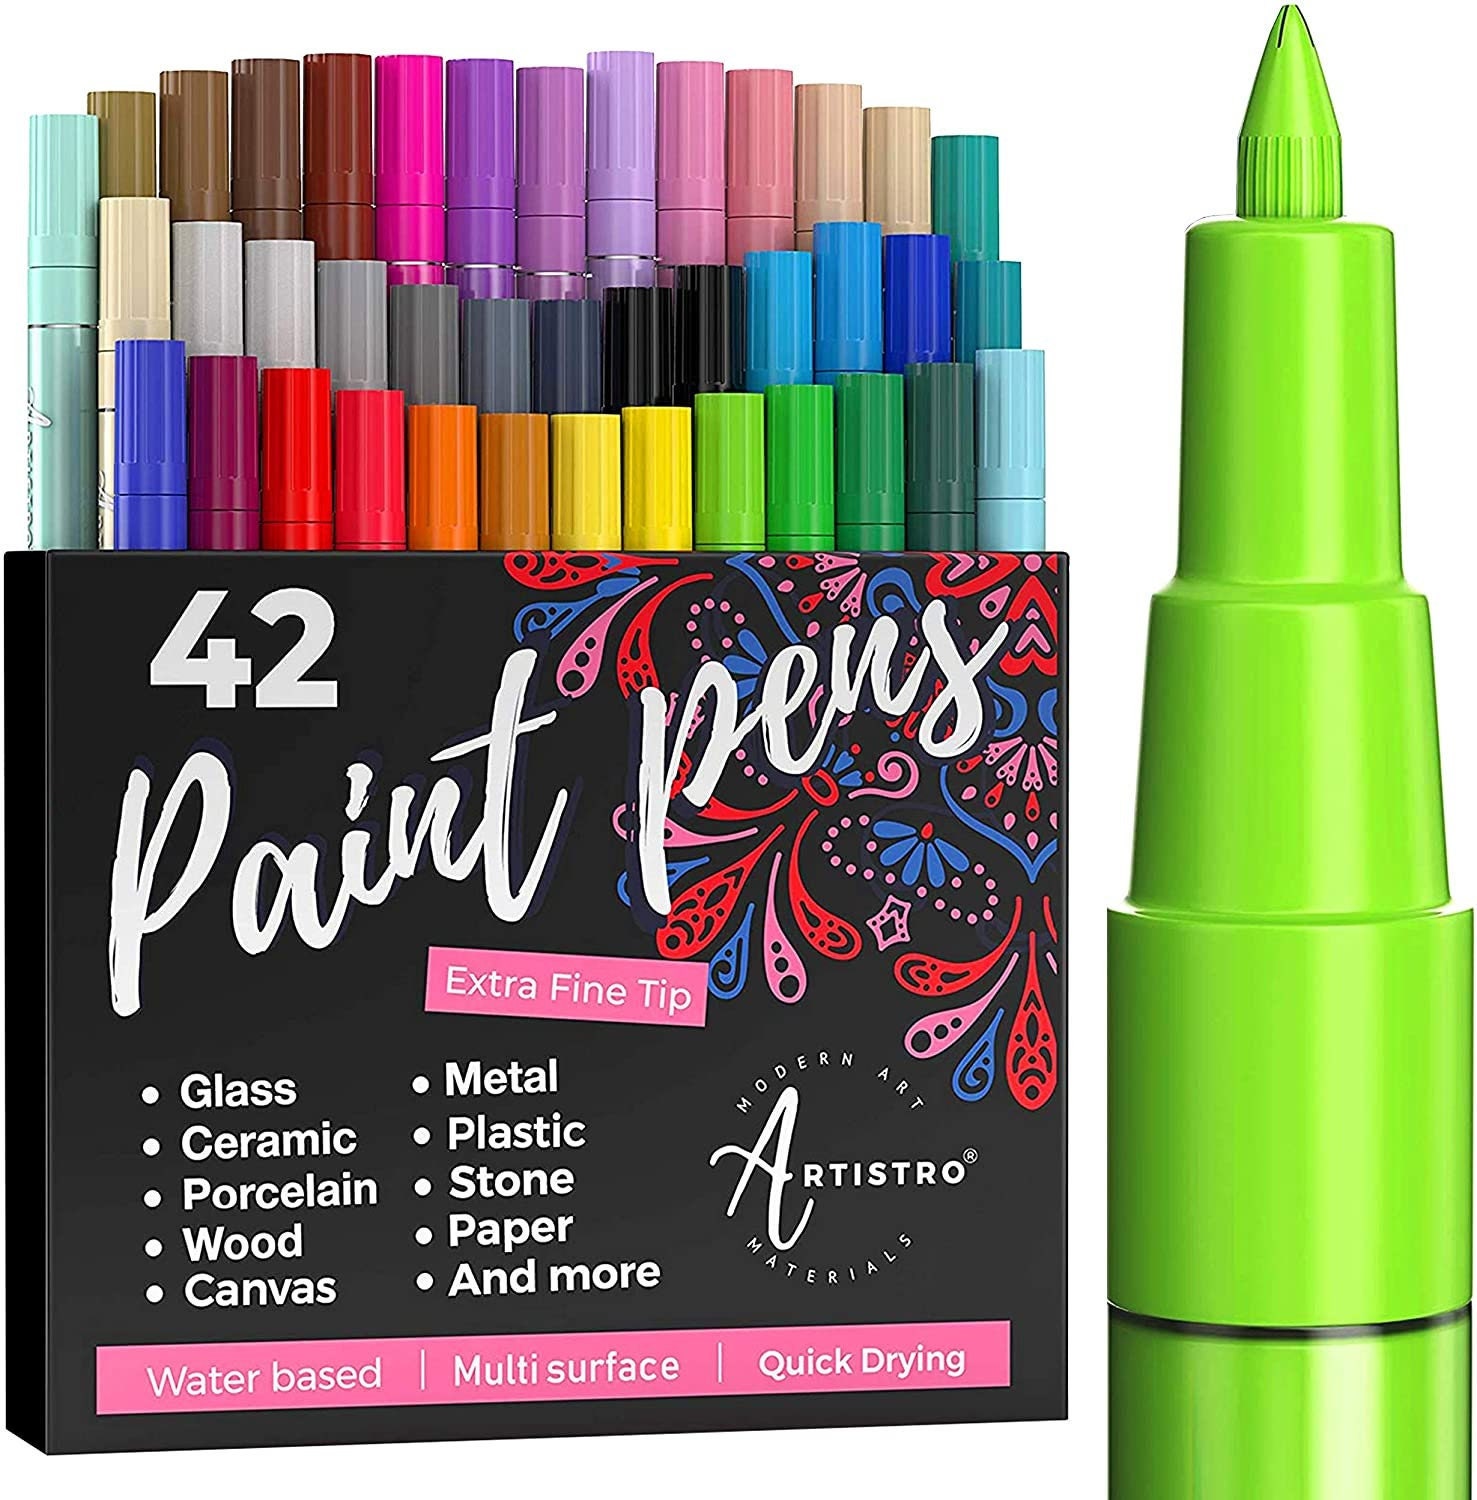 ARTISTRO 10 Jumbo Colored Markers, 15mm Jumbo Felt Tip, Acrylic Paint  Markers for Rock Painting, Stone, Ceramic, Glass, Wood, Canvas